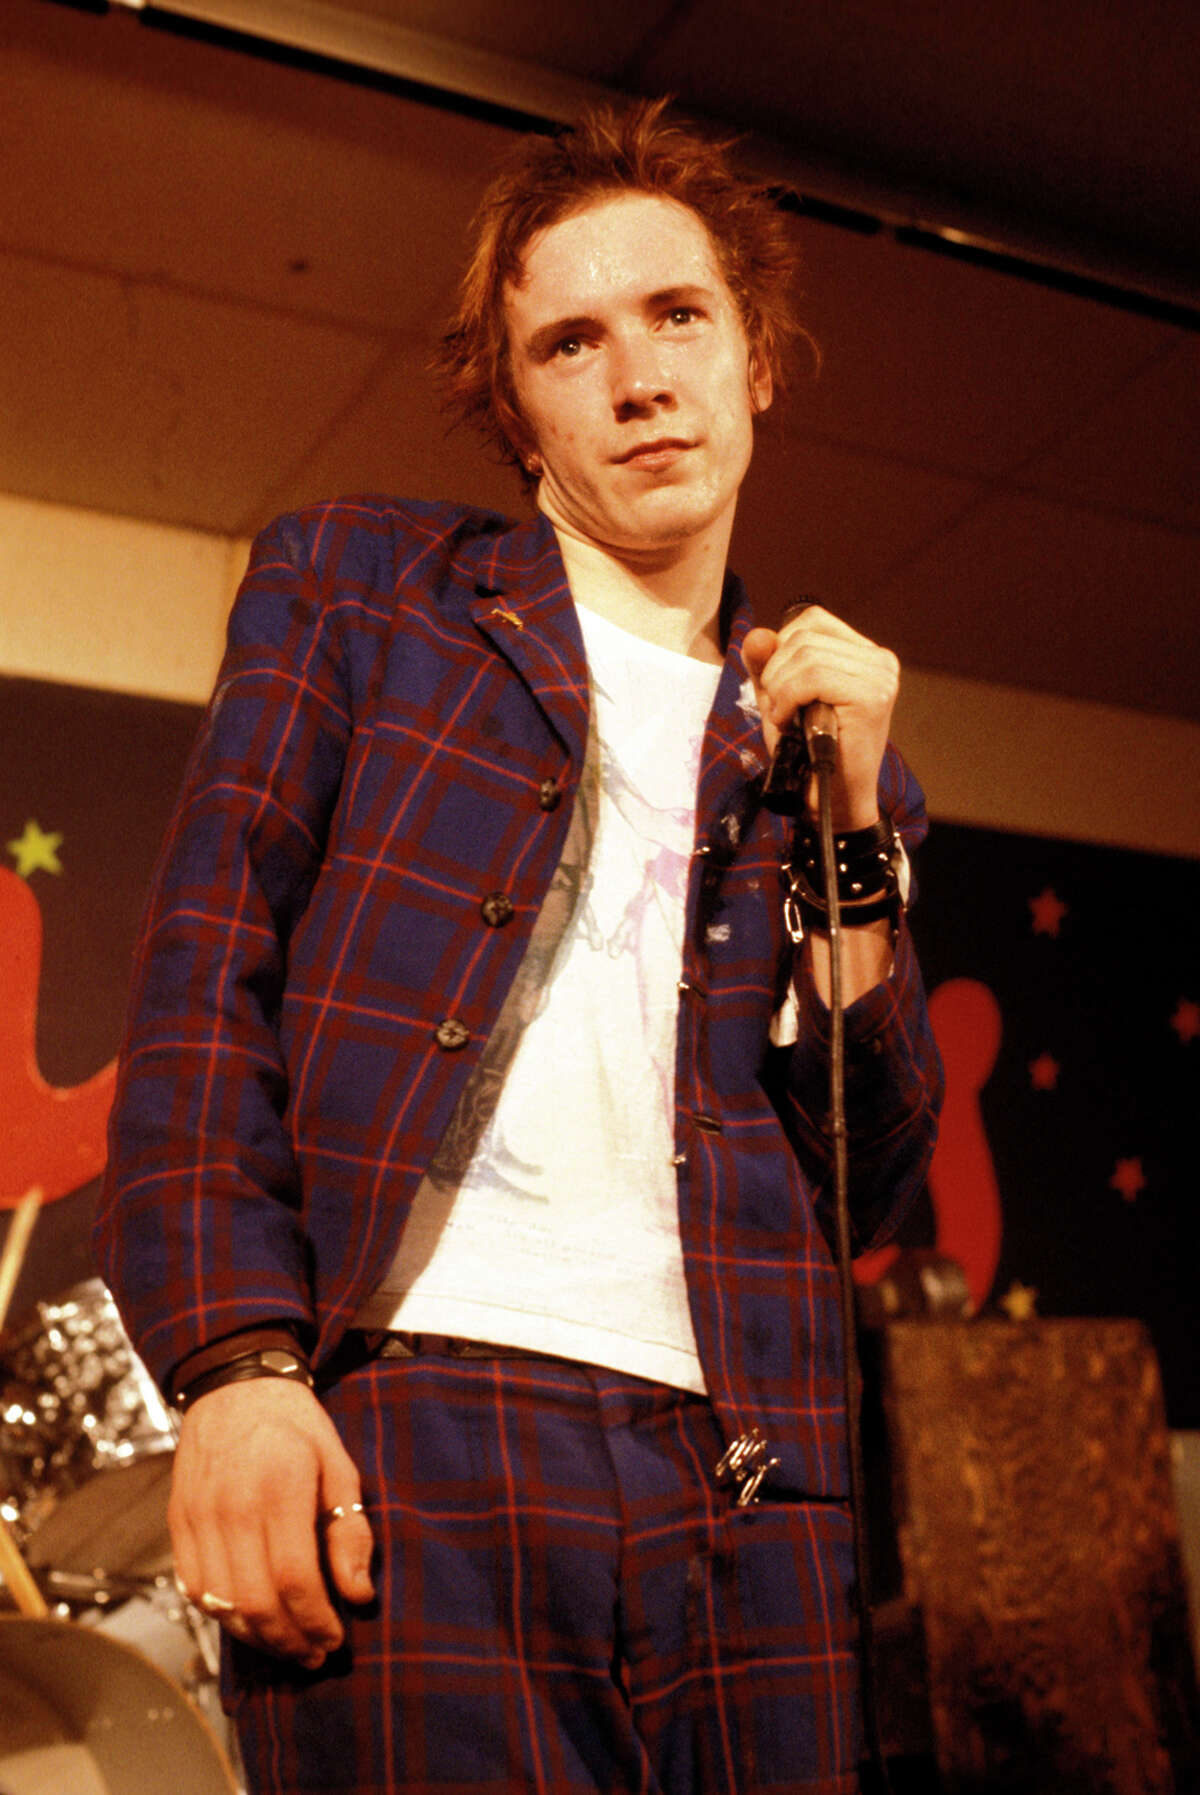 Johnny Rotten and The Sex Pistols perform at Randy's Rodeo Nightclub in San Antonio on Jan. 8, 1978.